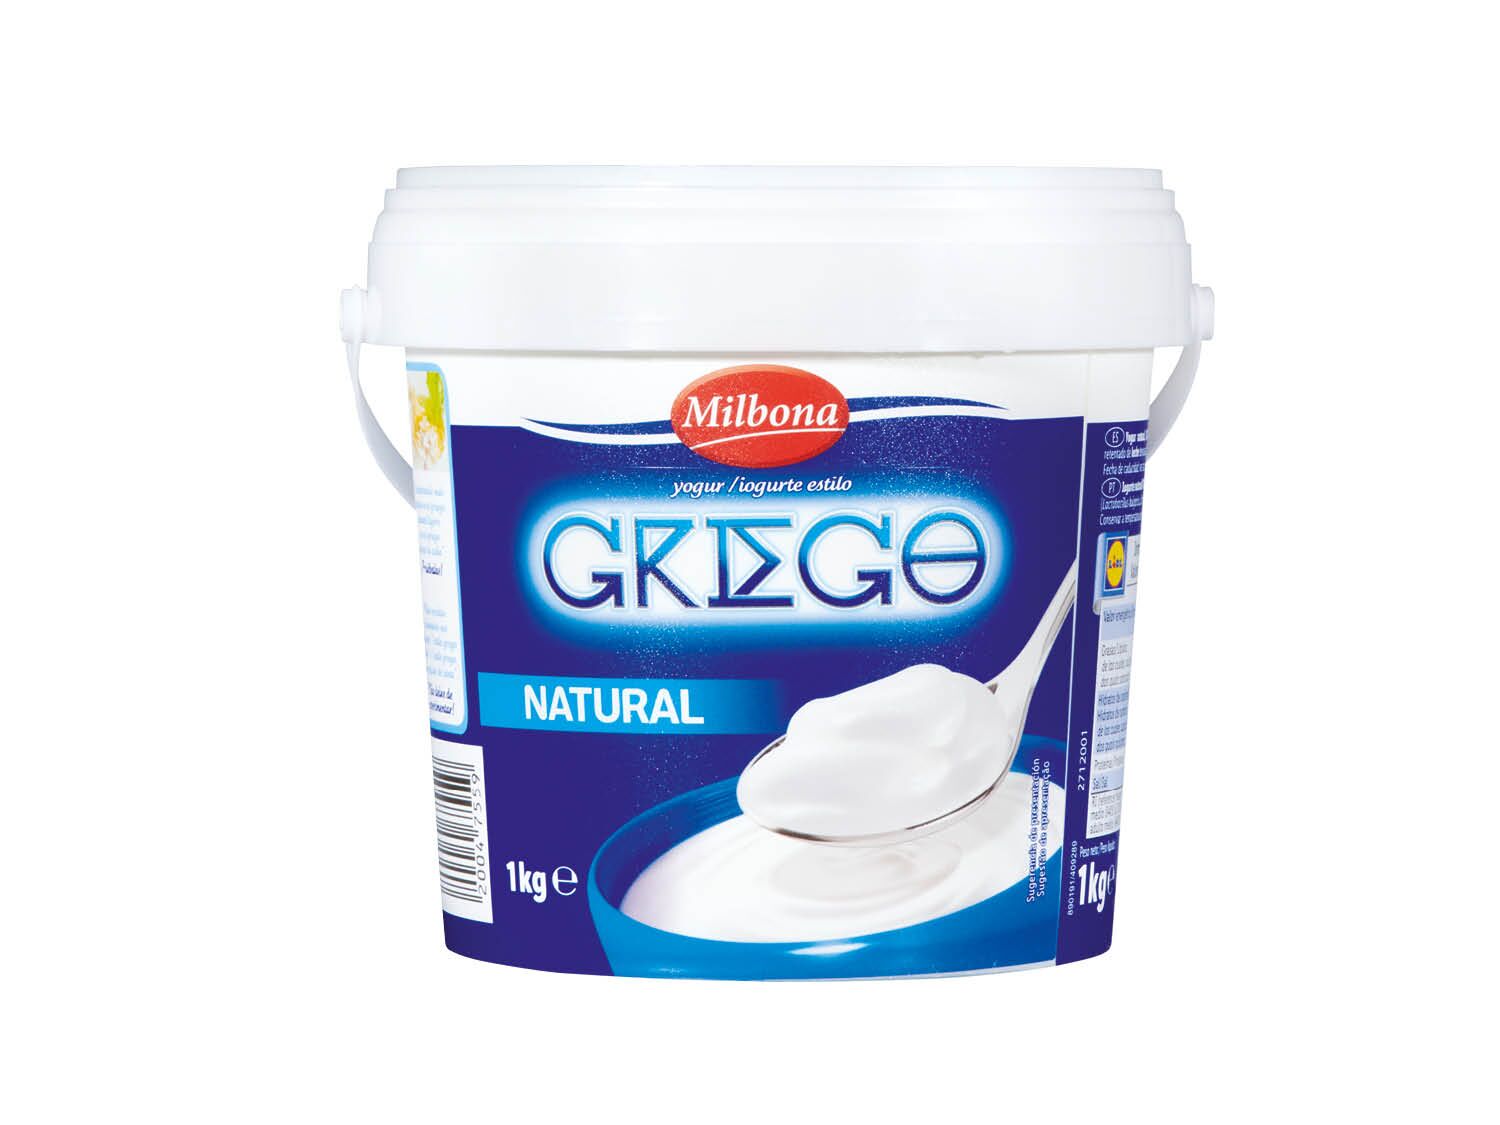 Griego natural